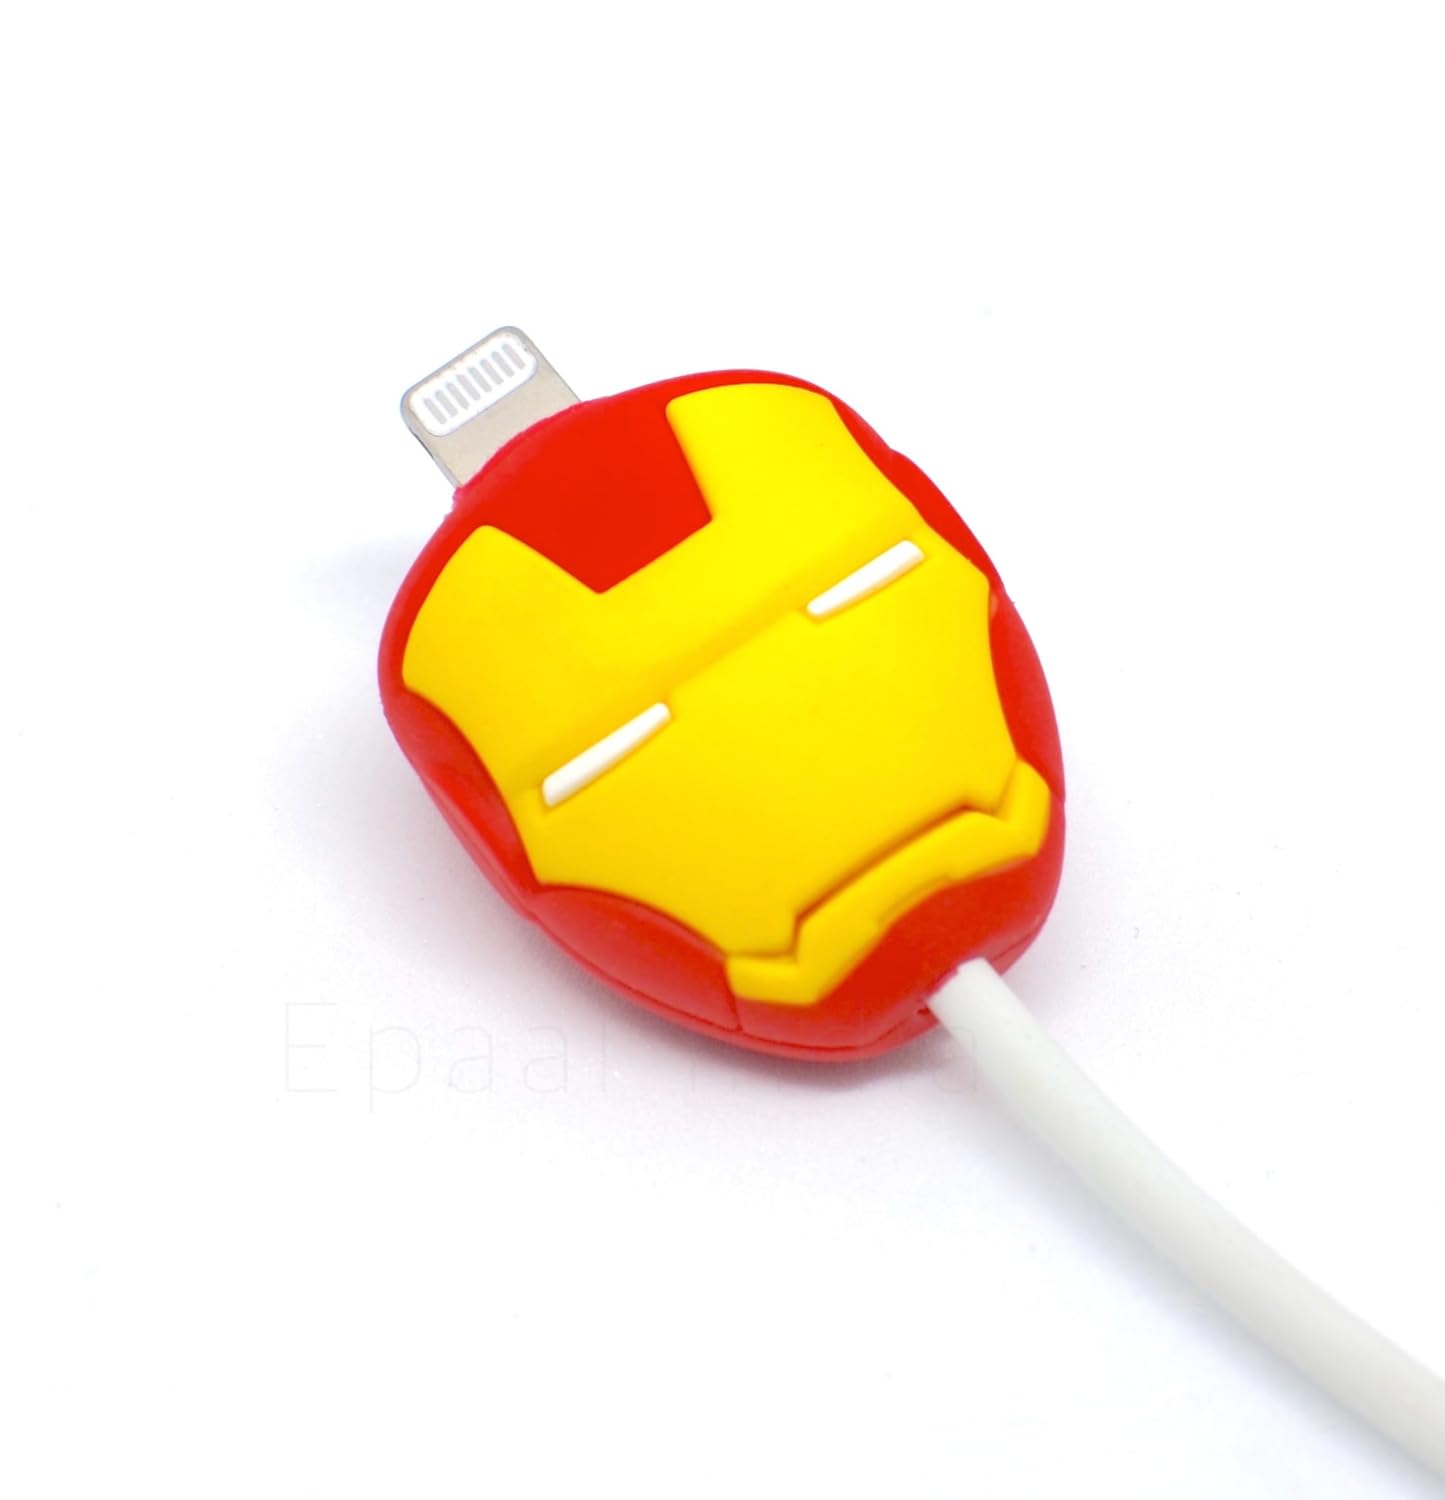 Iphone Charger Case Cover - Ironman (4 Piece Set)